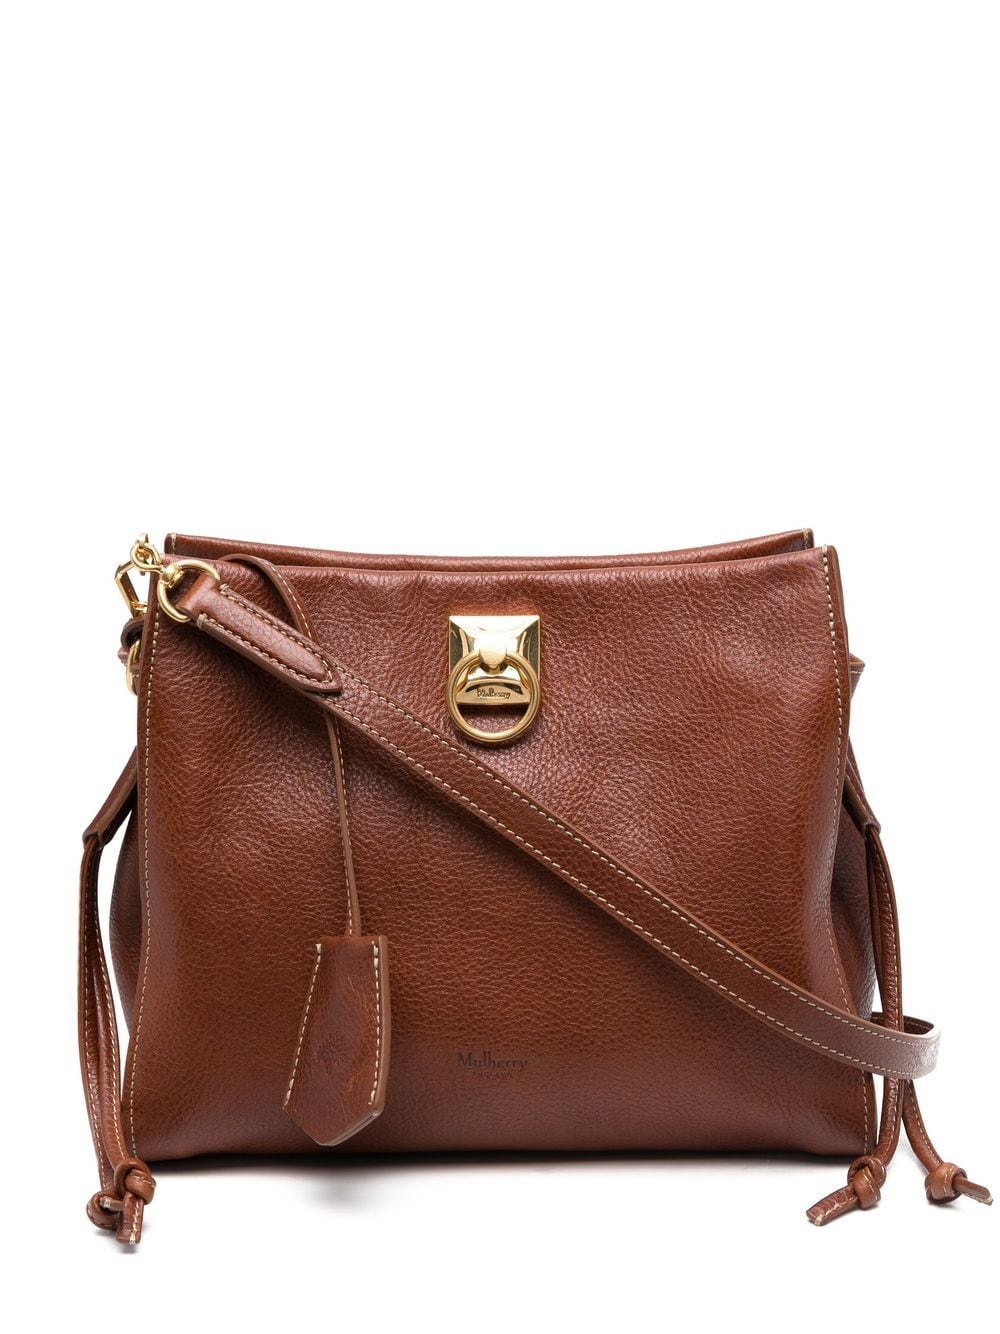 Mulberry small Iris tote - Brown von Mulberry